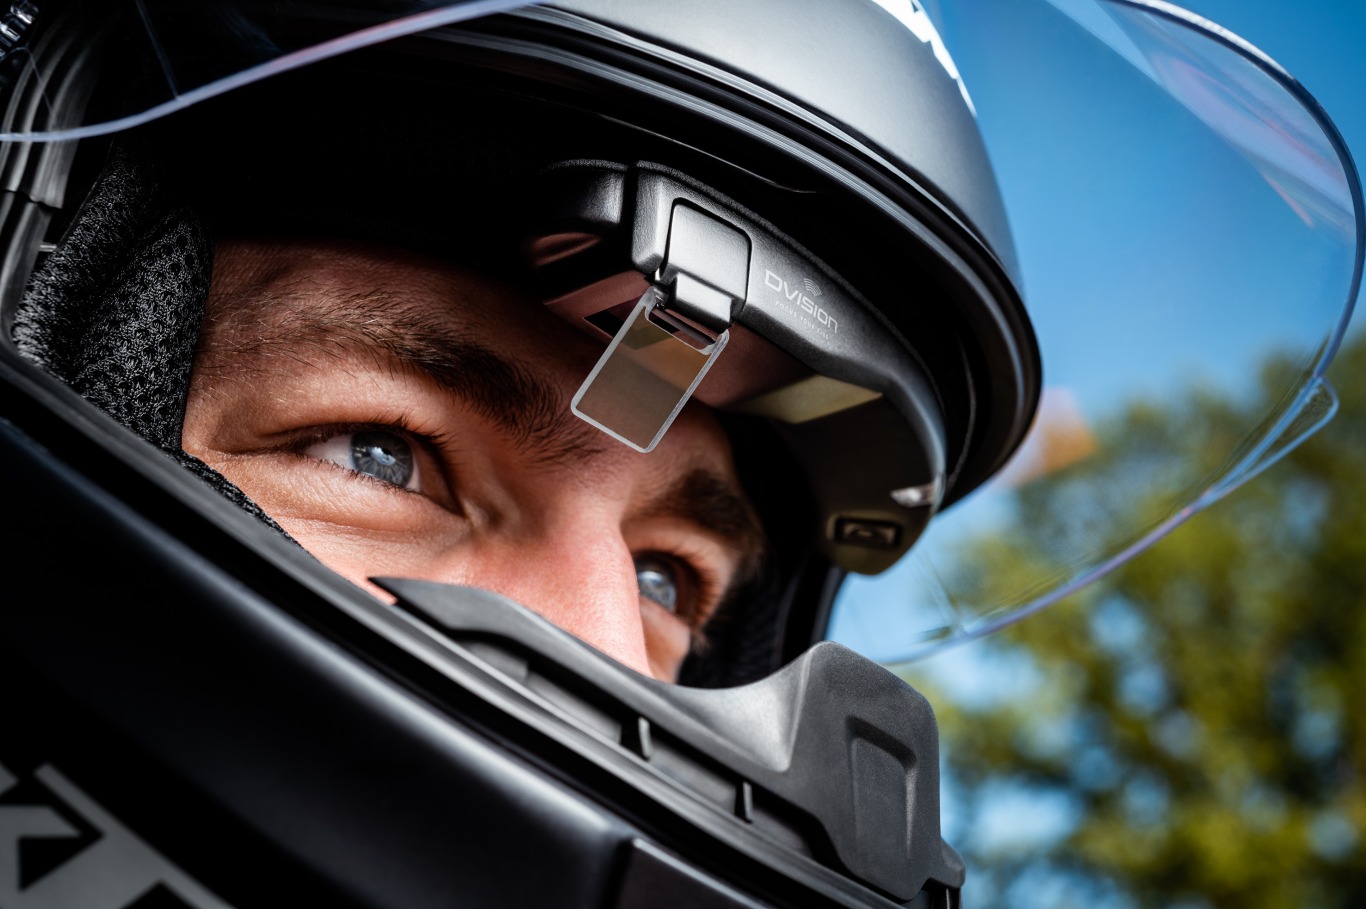 DVISION is a head-up display for motorcyclists